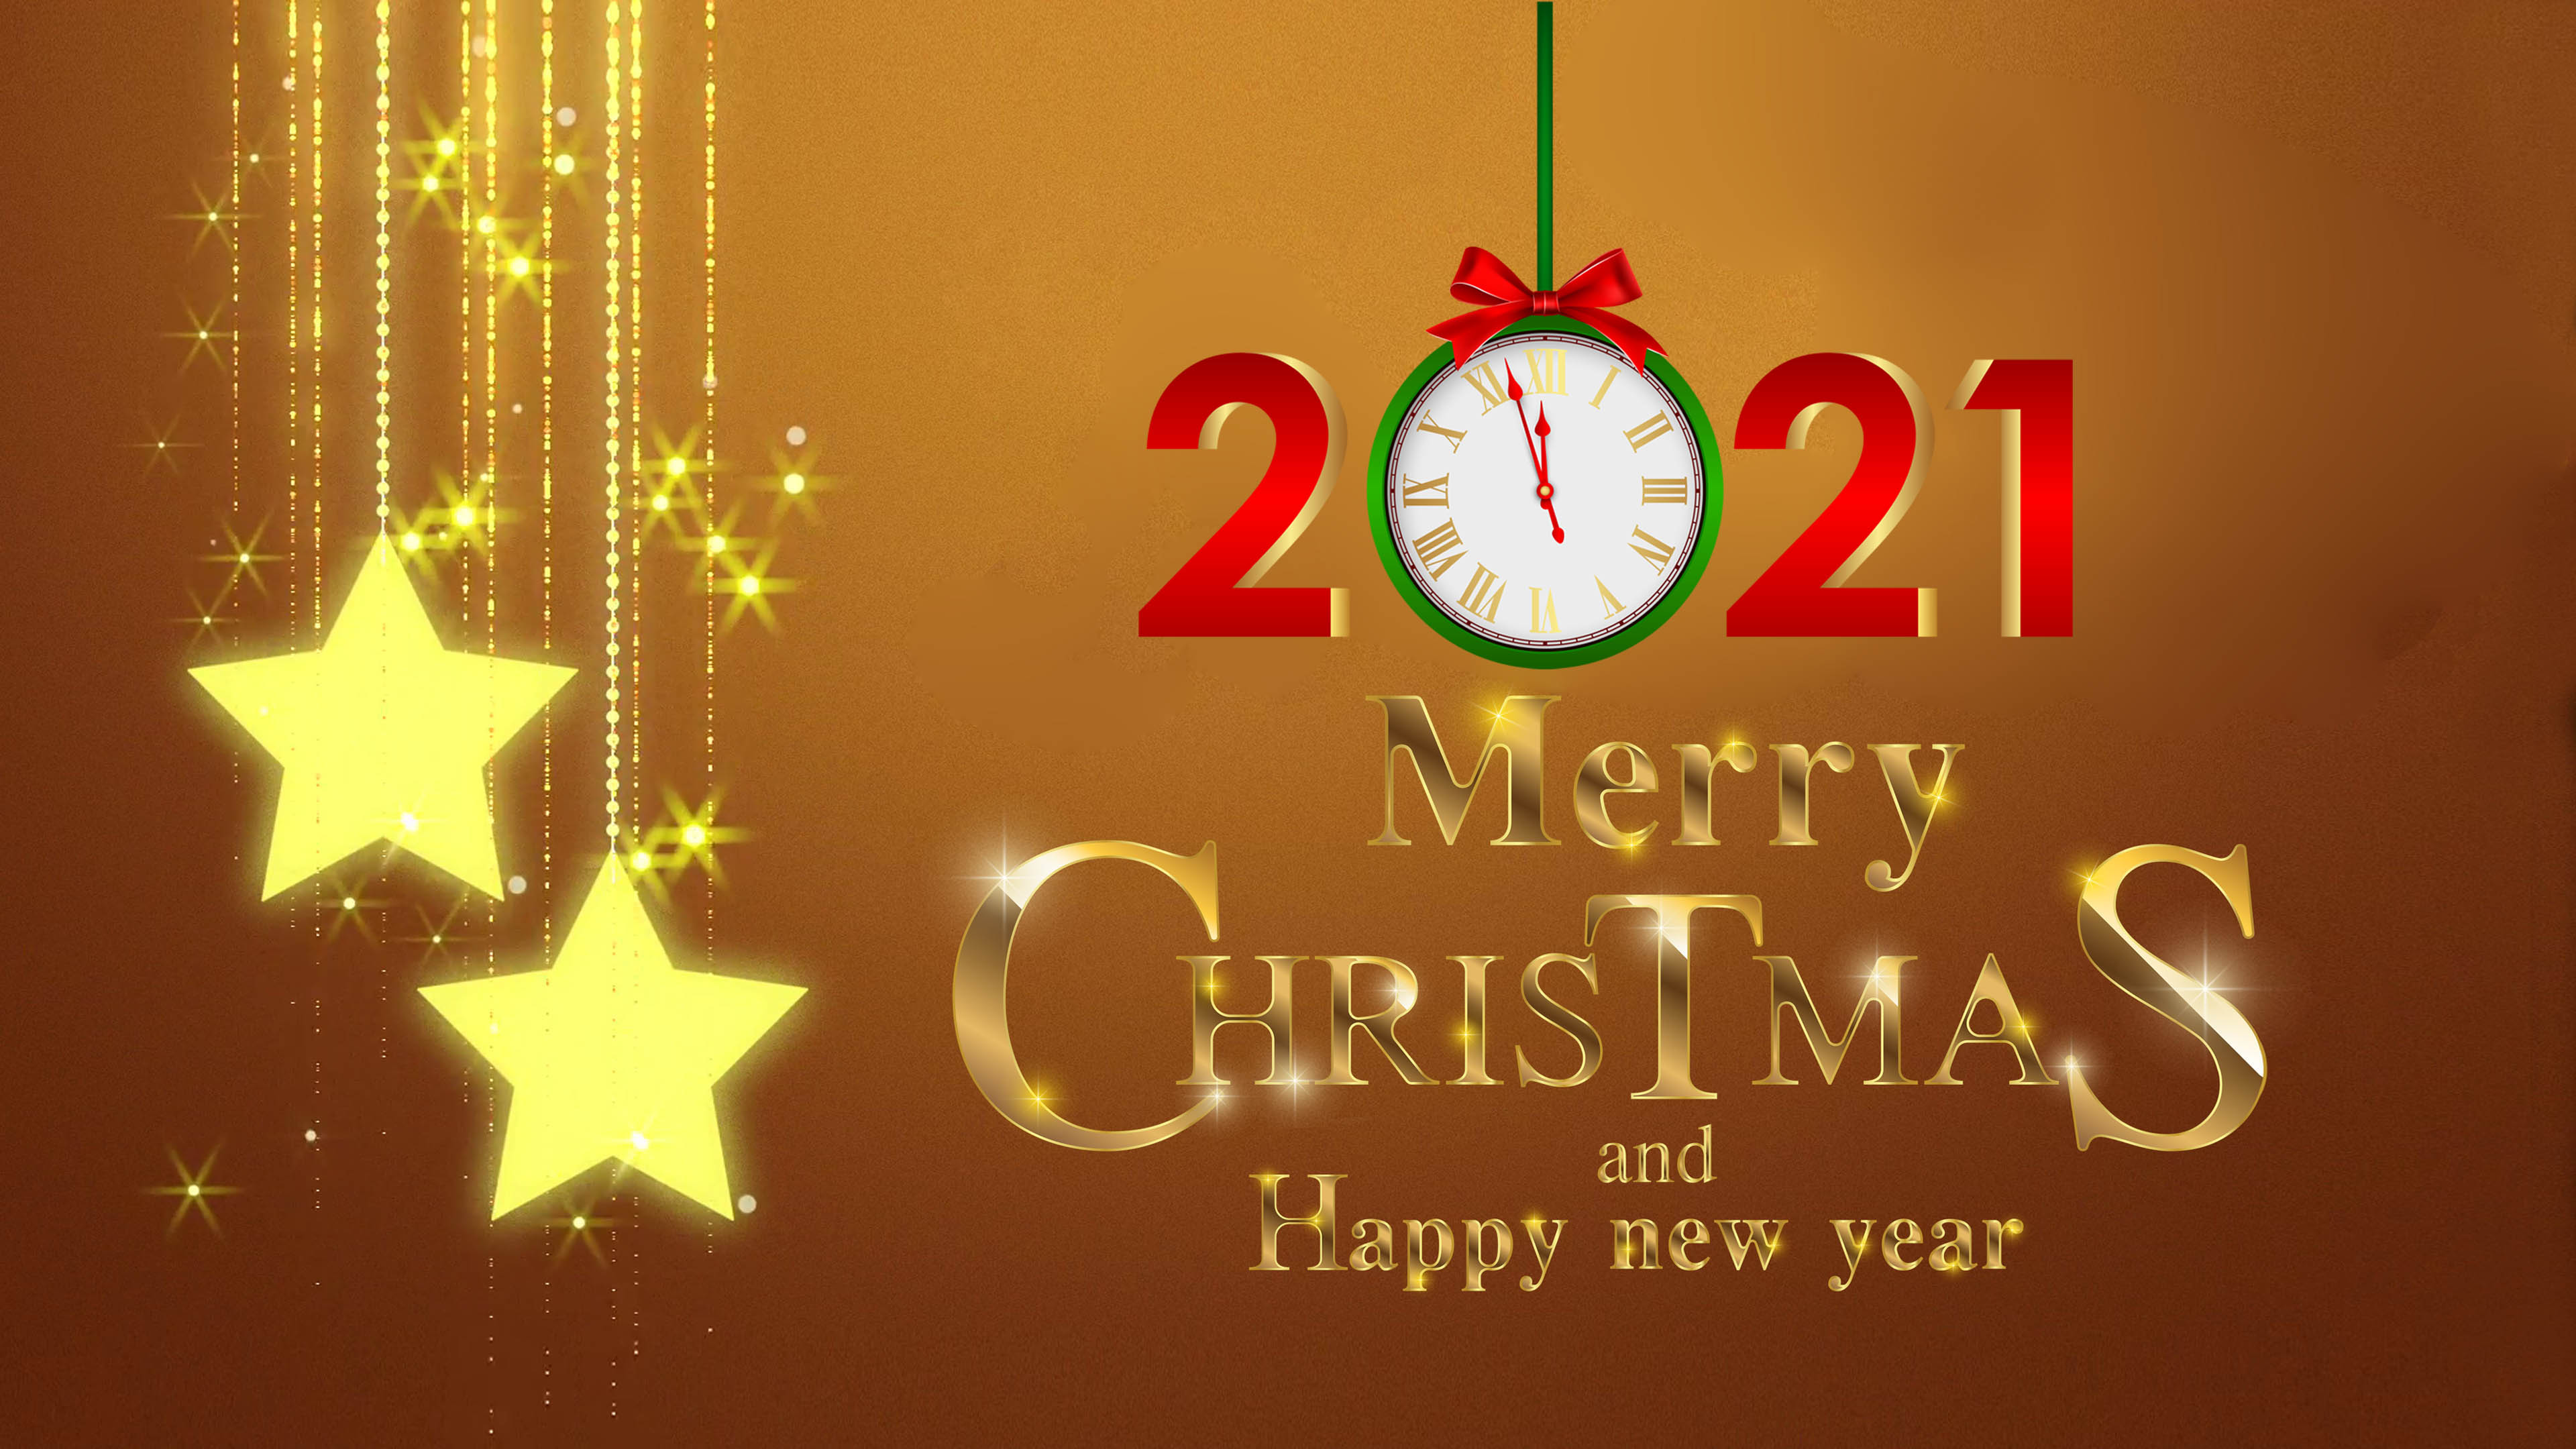 Merry Christmas And Happy New Year 2021 Gold 4k Ultra HD Desktop Wallpaper For Computers Laptop Tablet And Mobile Phones, Wallpaper13.com